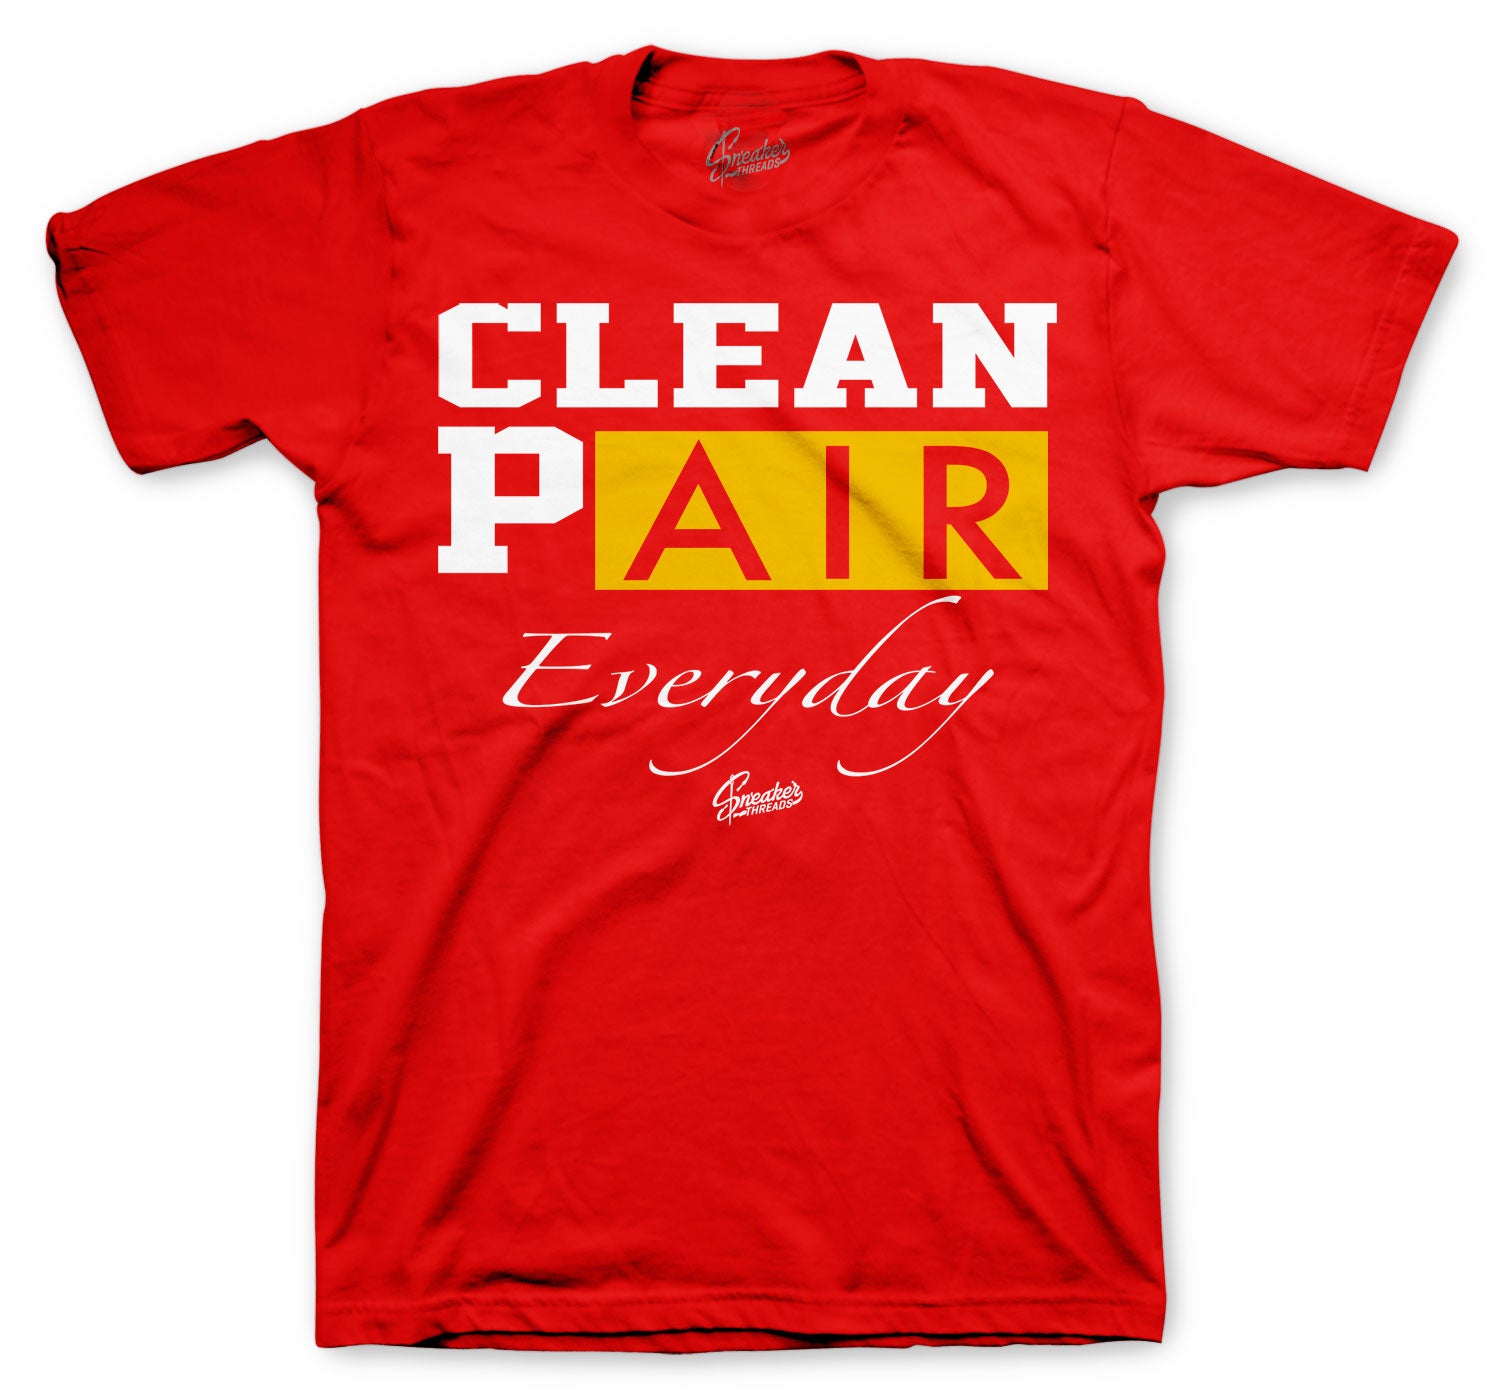 All Star 2020 Trophies Shirt  - Everyday - Red